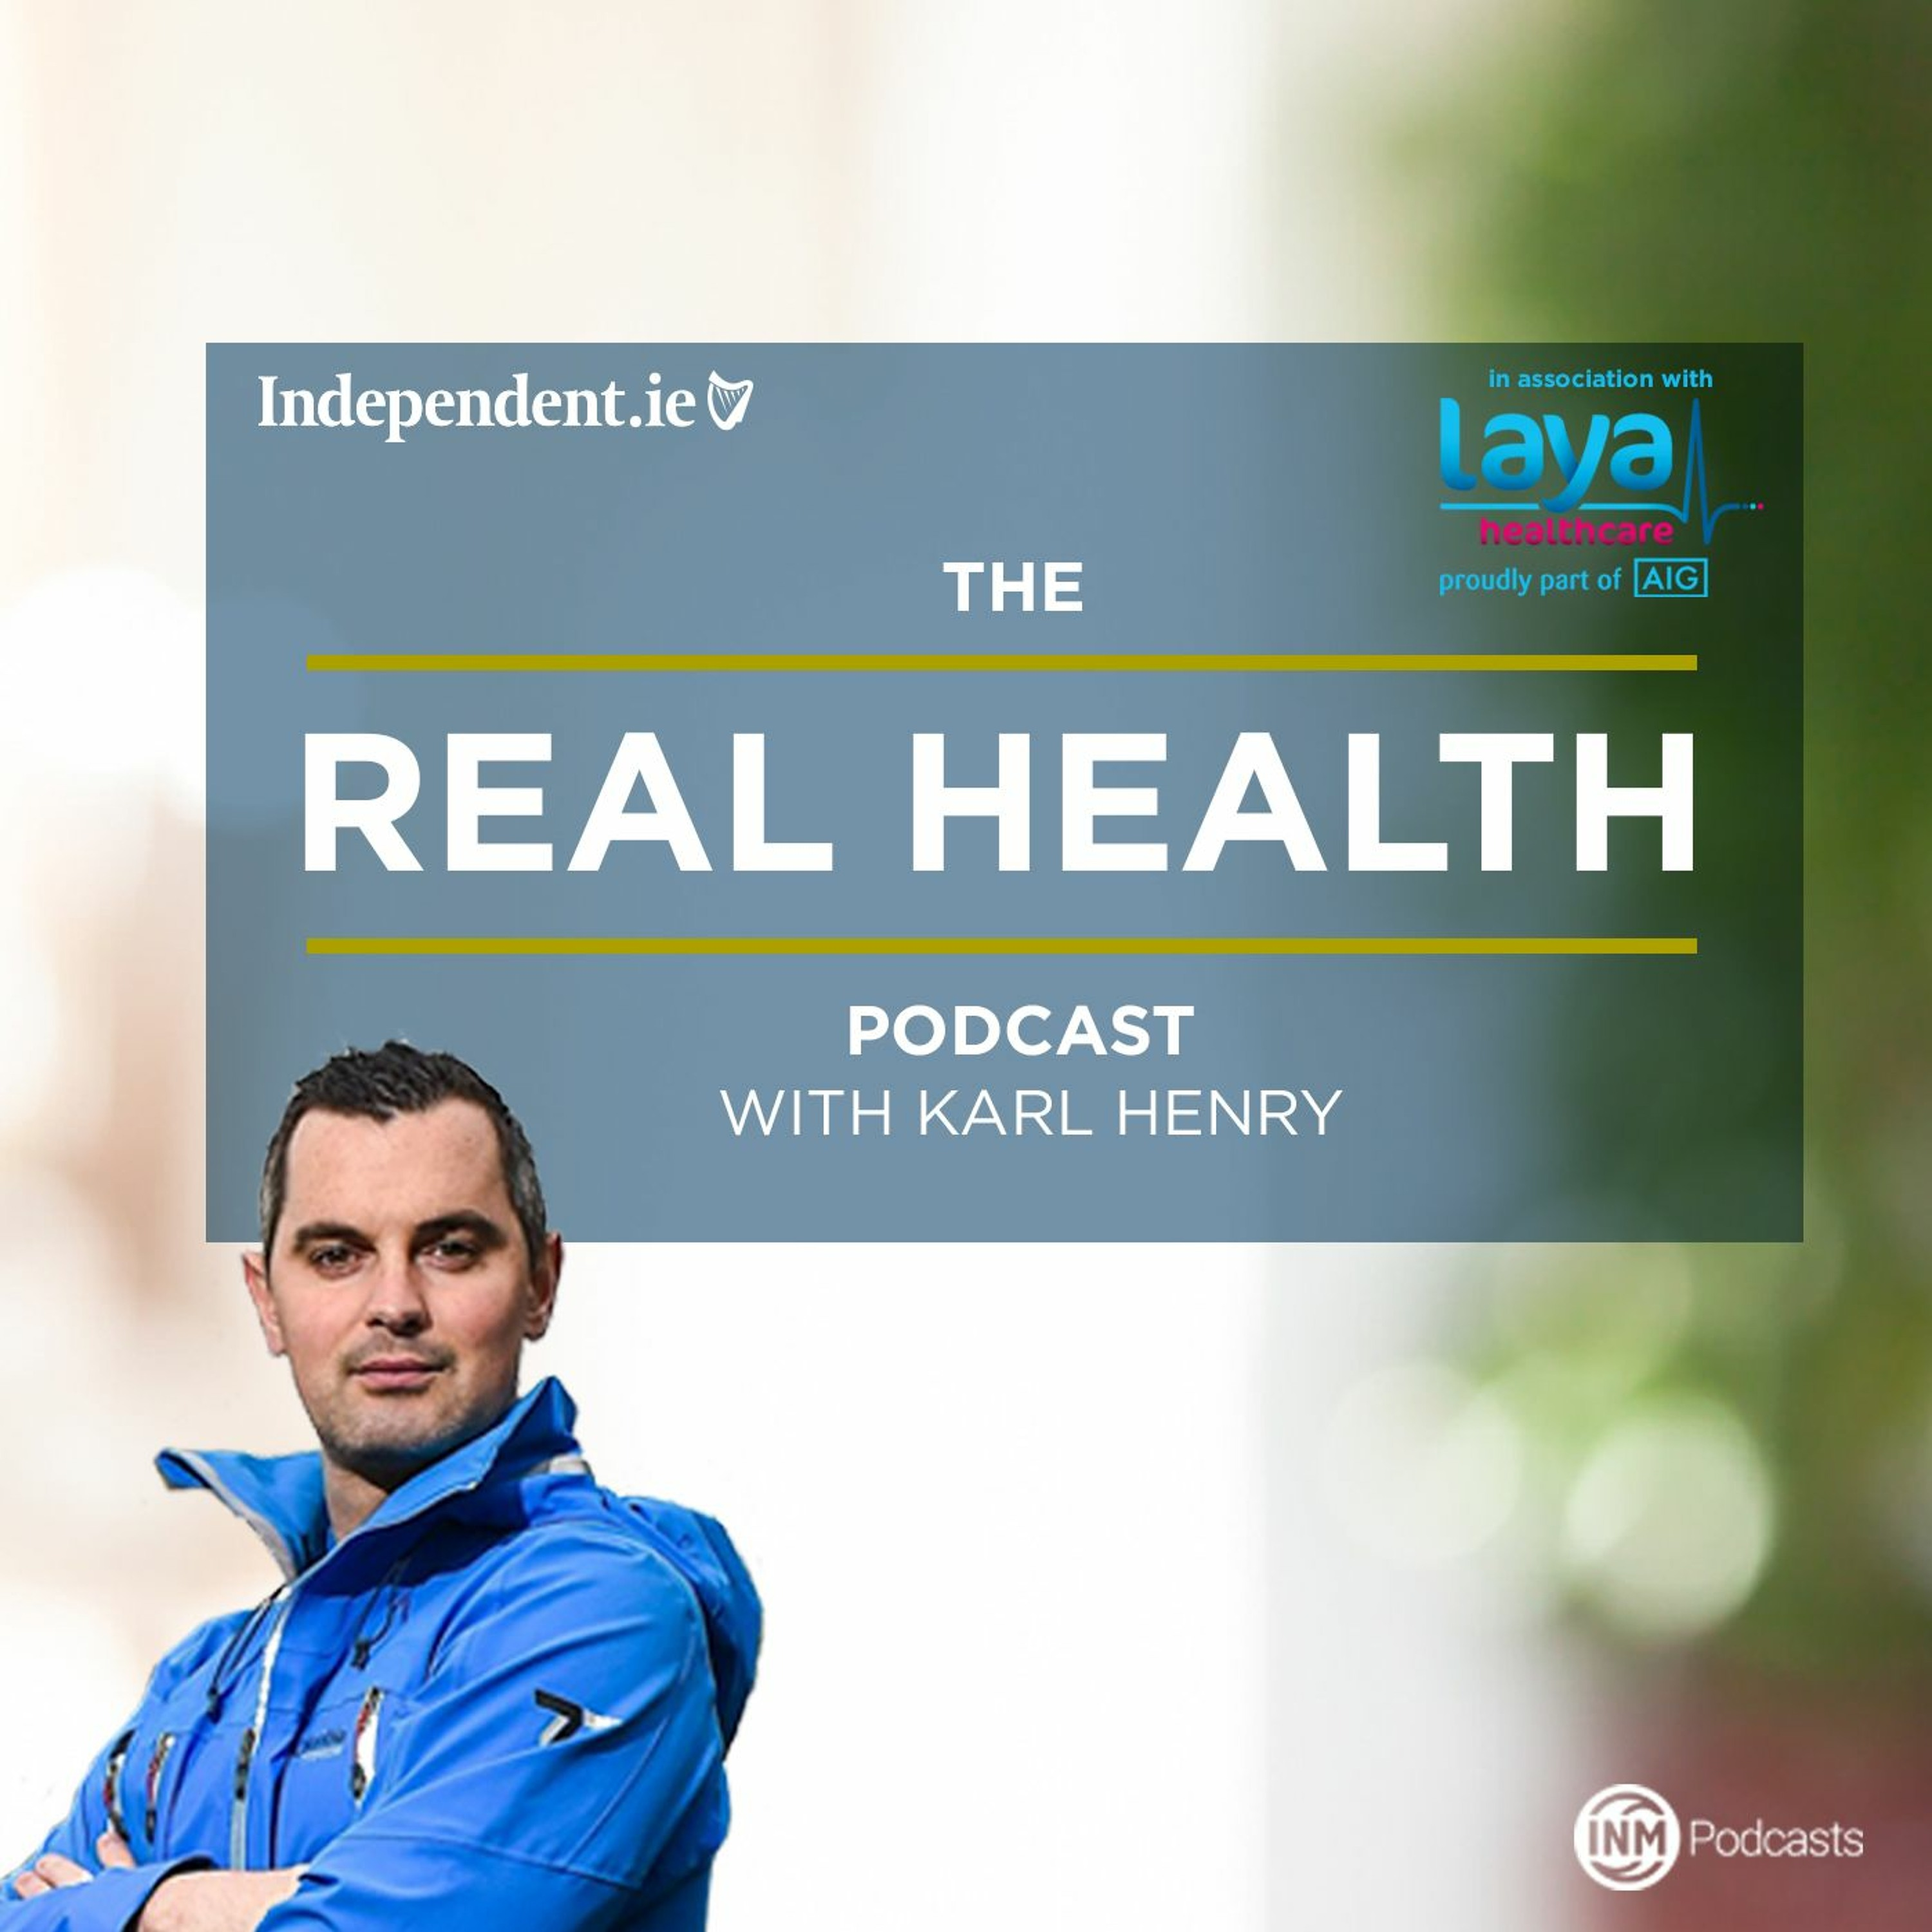 Elite Performance Nutrition with Leinster Rugby and Dublin GAA’s Nutritionist, Daniel Davey